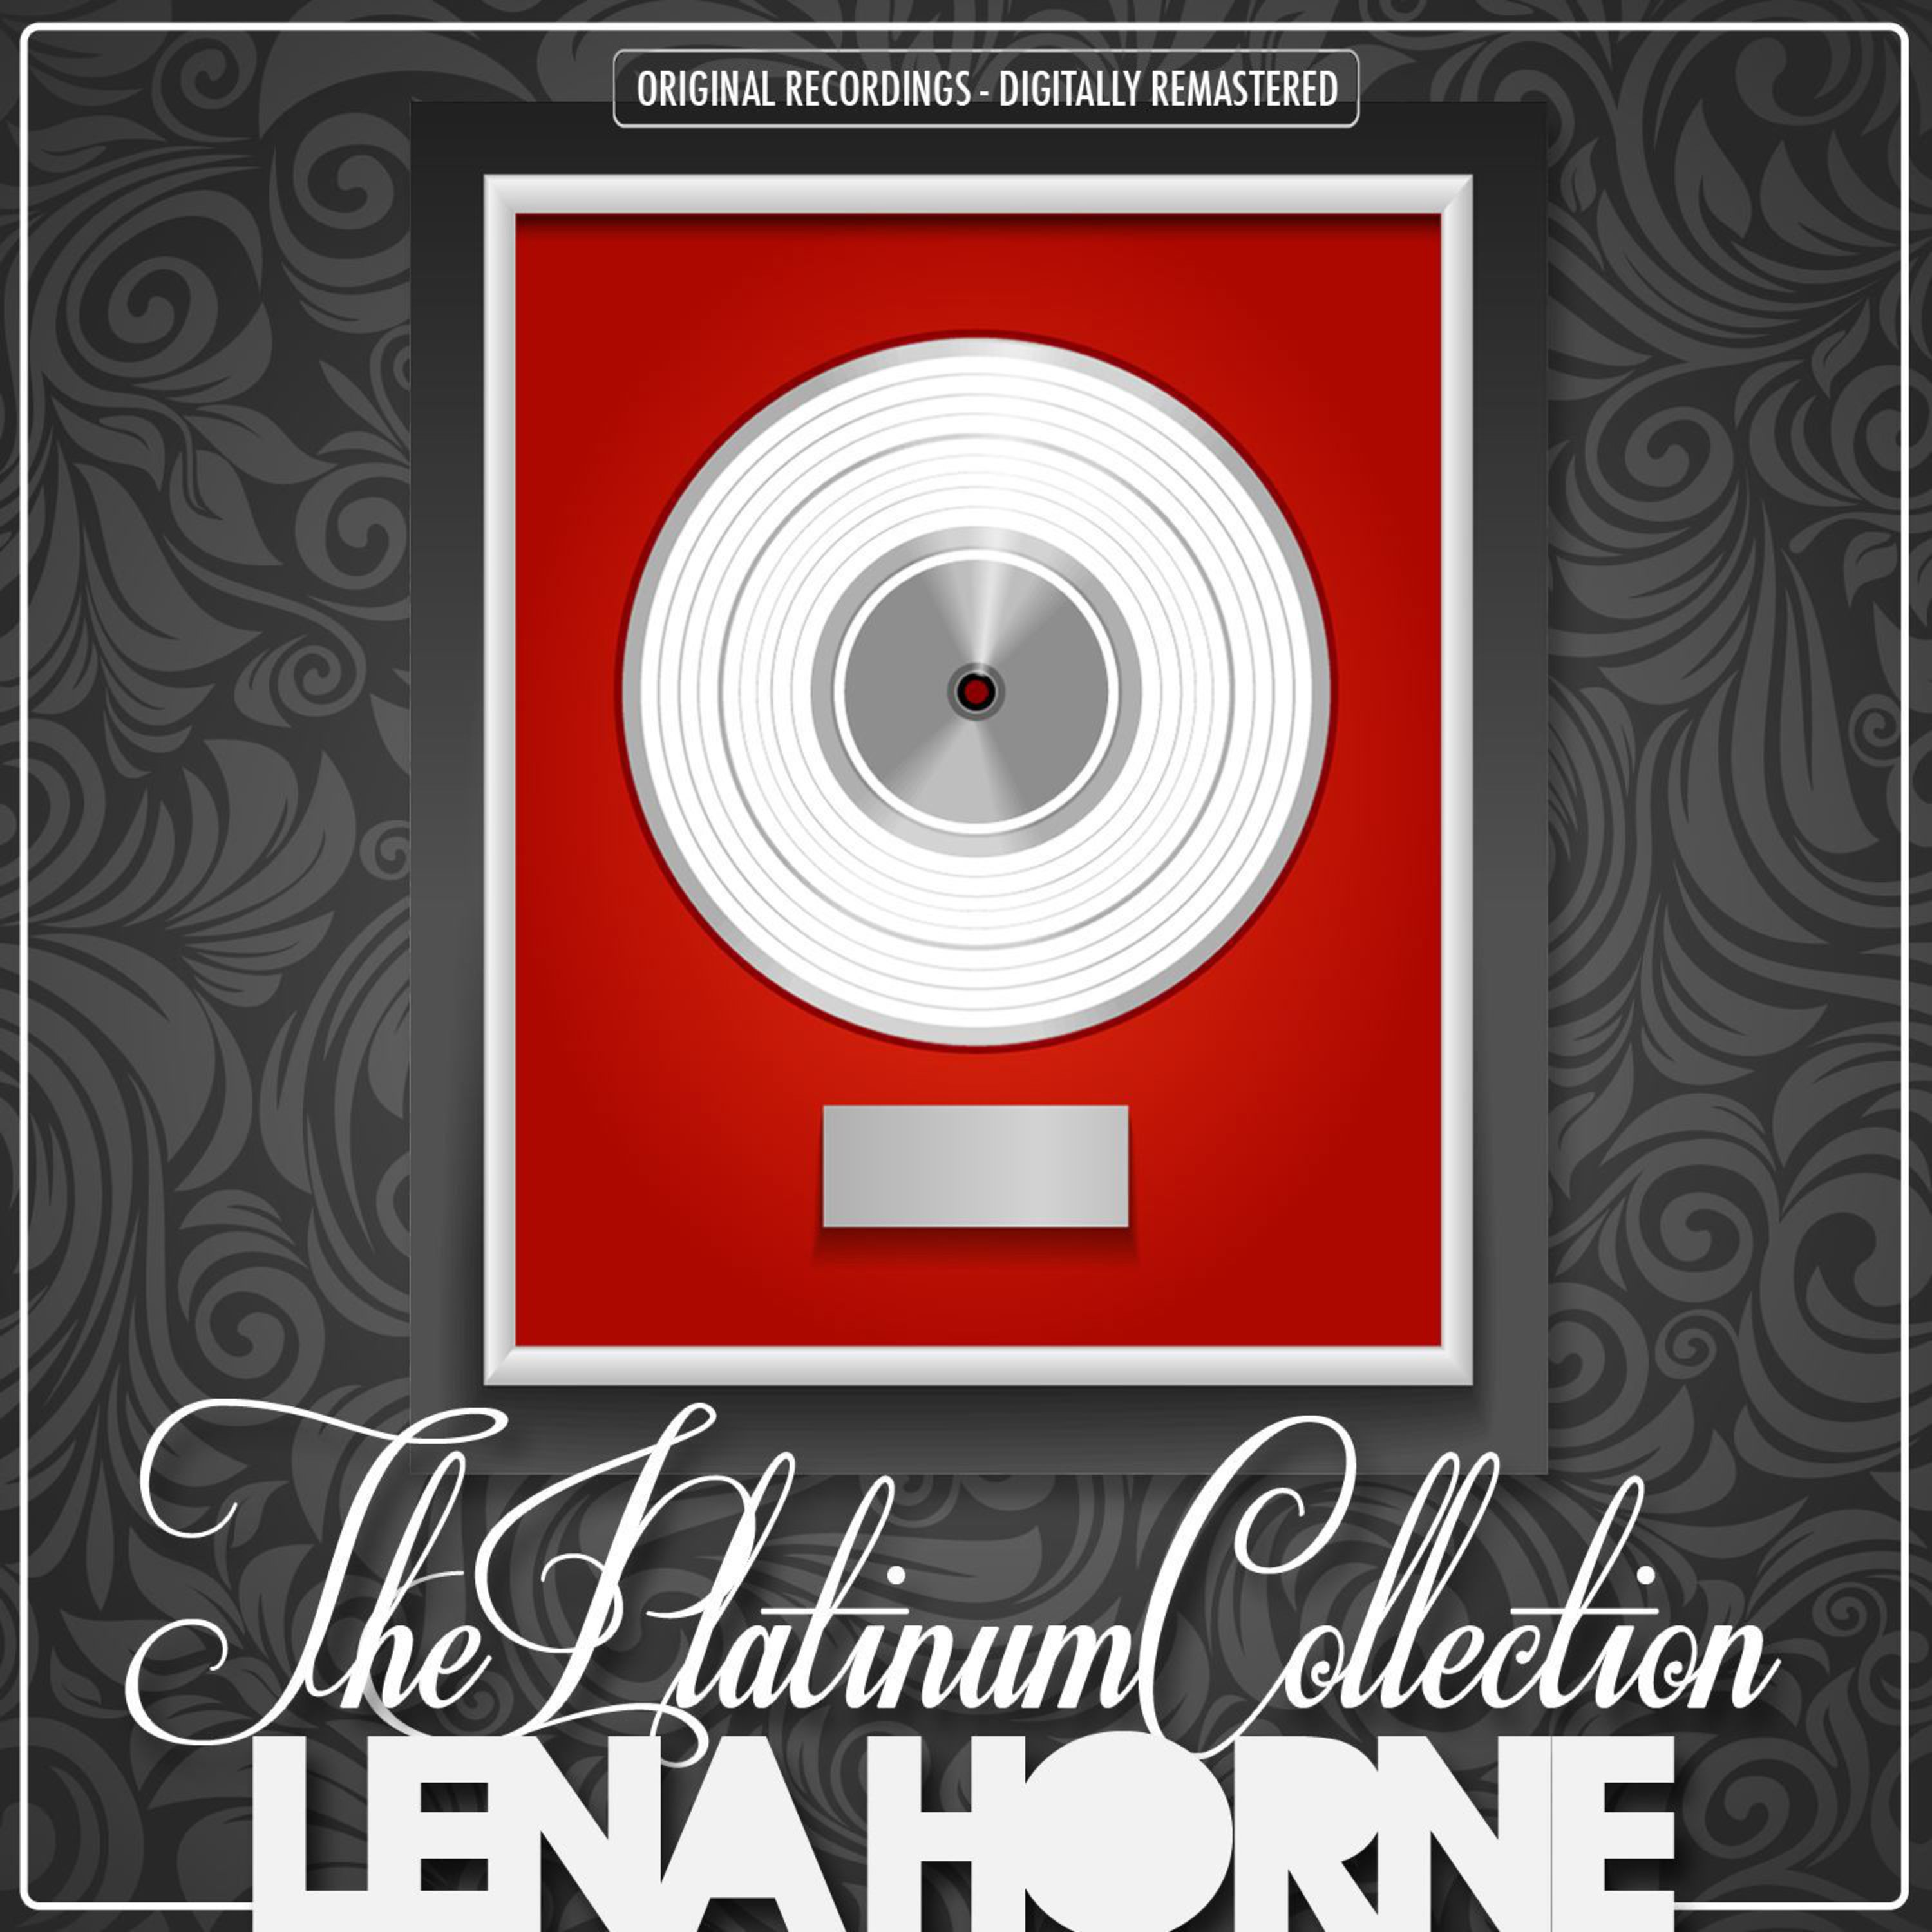 The Platinum Collection: Lena Horne